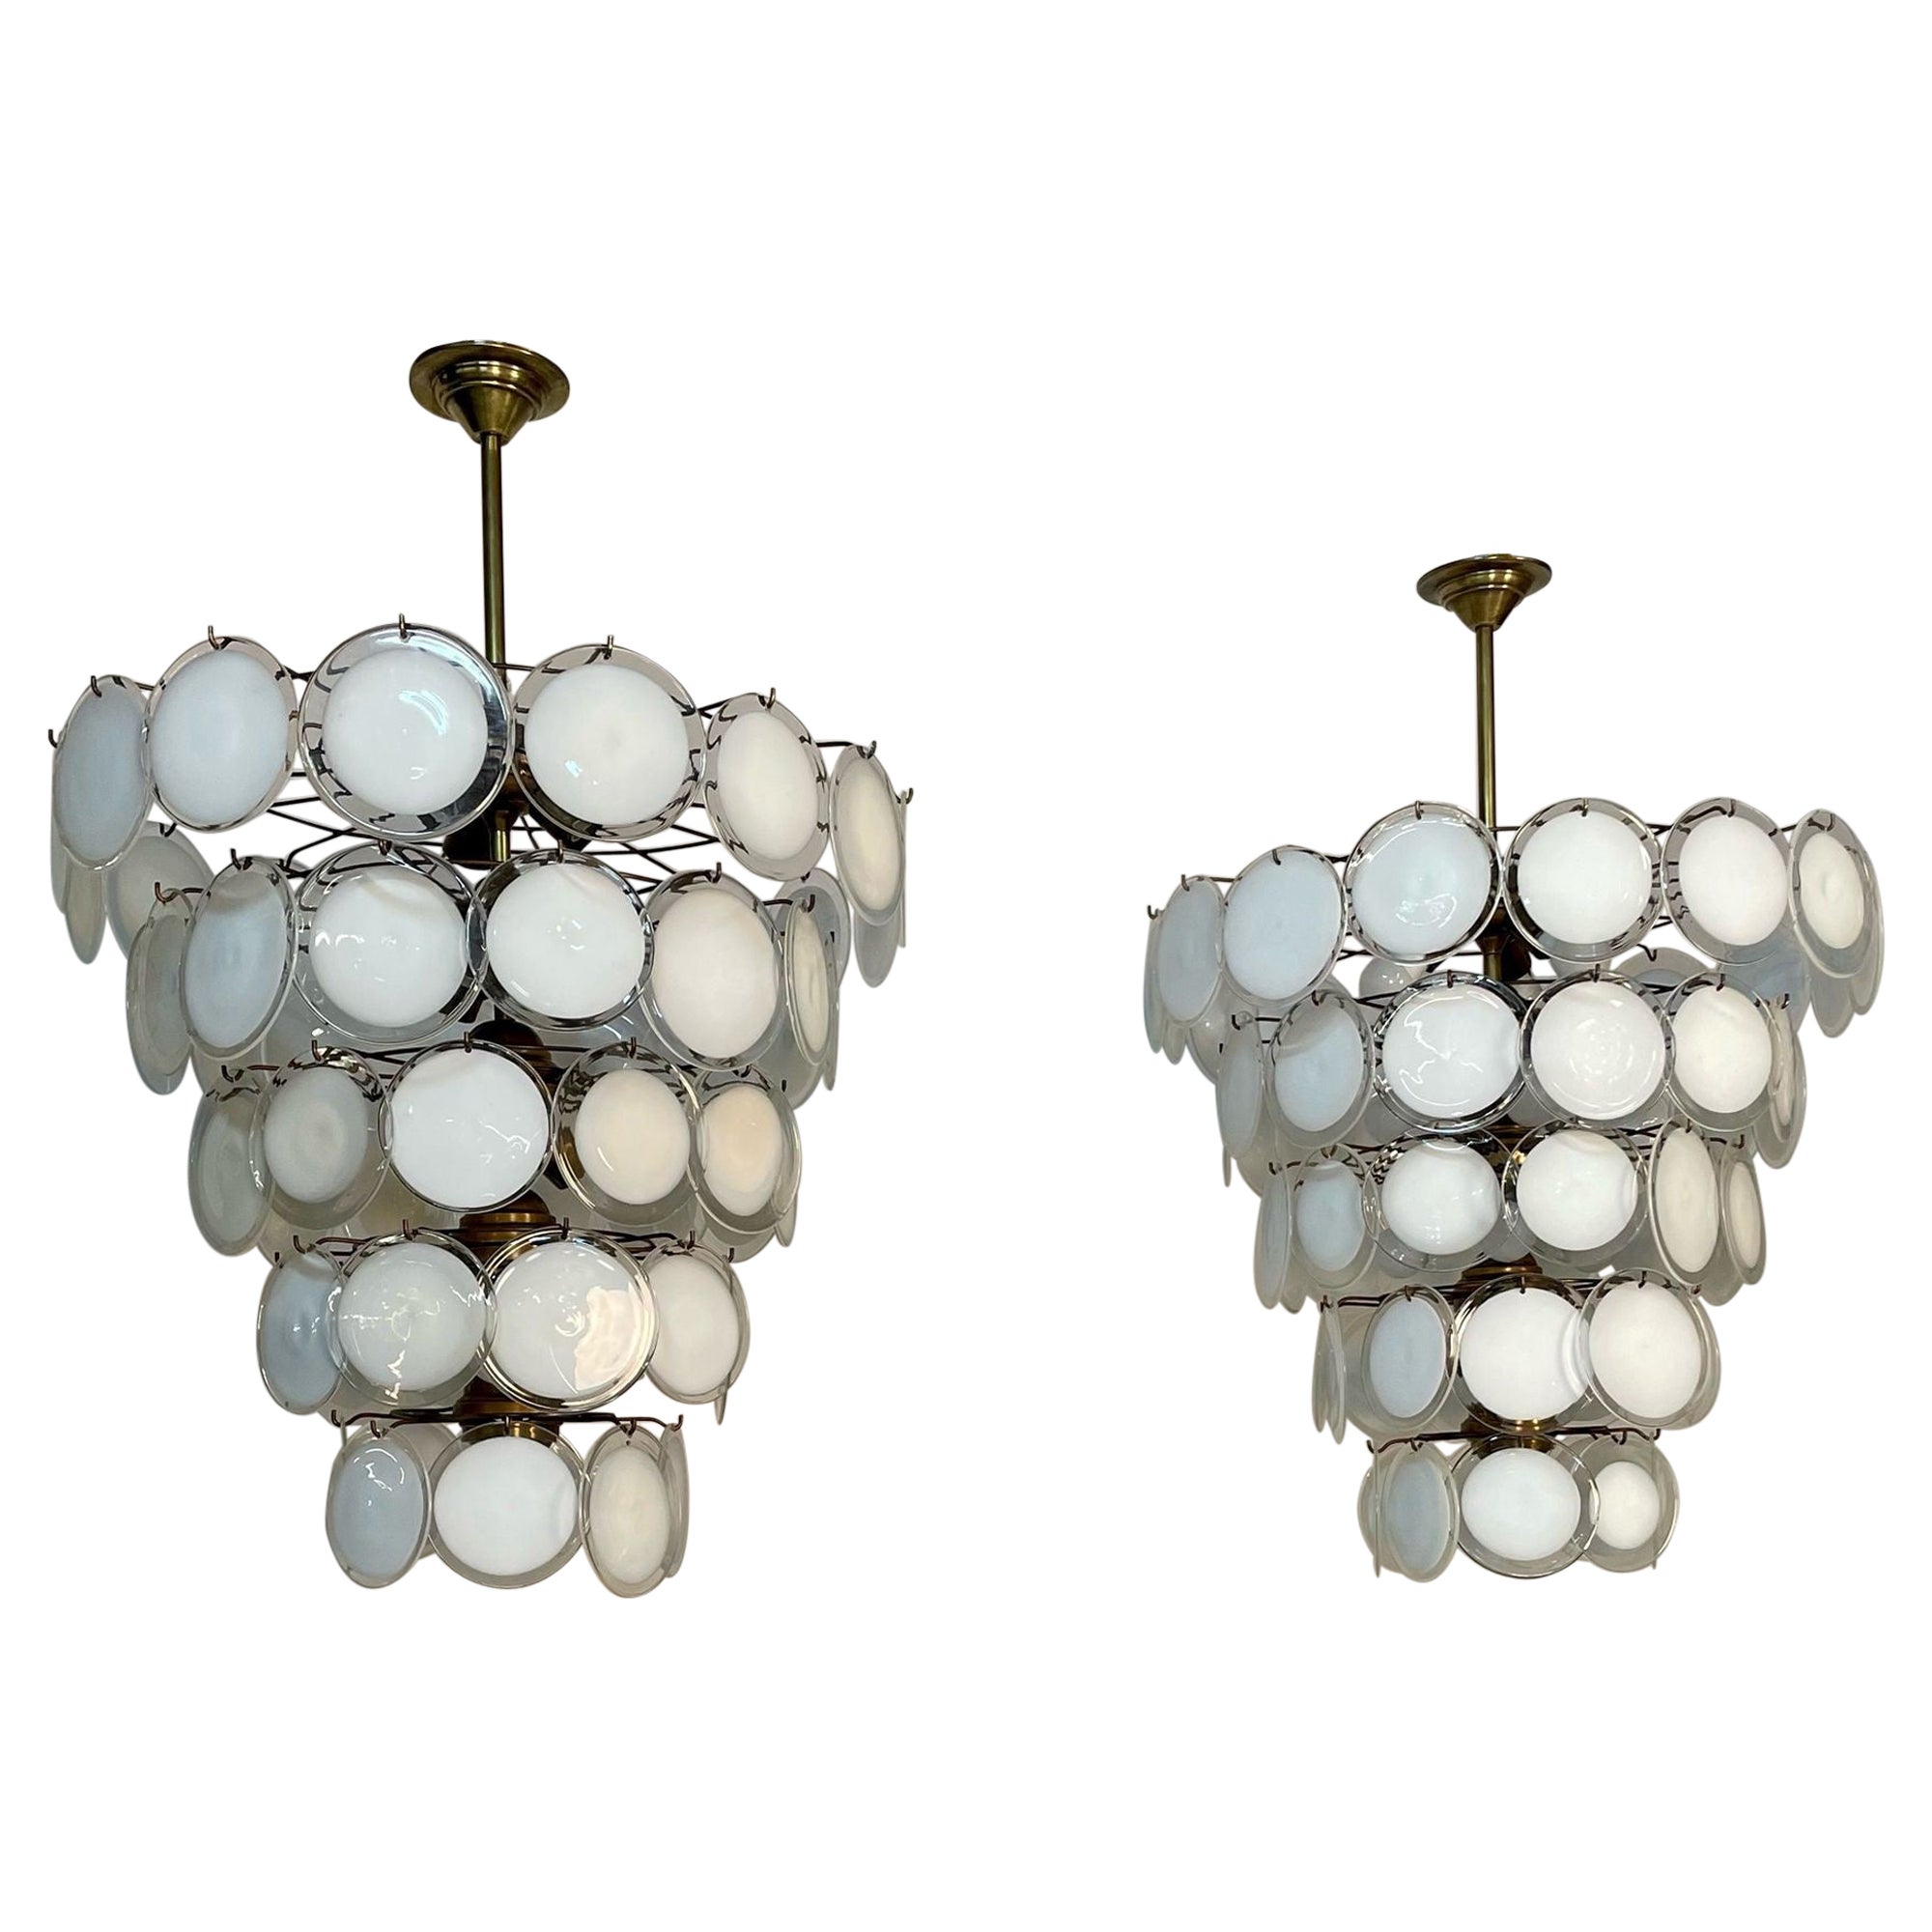 Pair of Murano Disc Mid-Century Modern Chandeliers, Antiqued Brass, New Wired